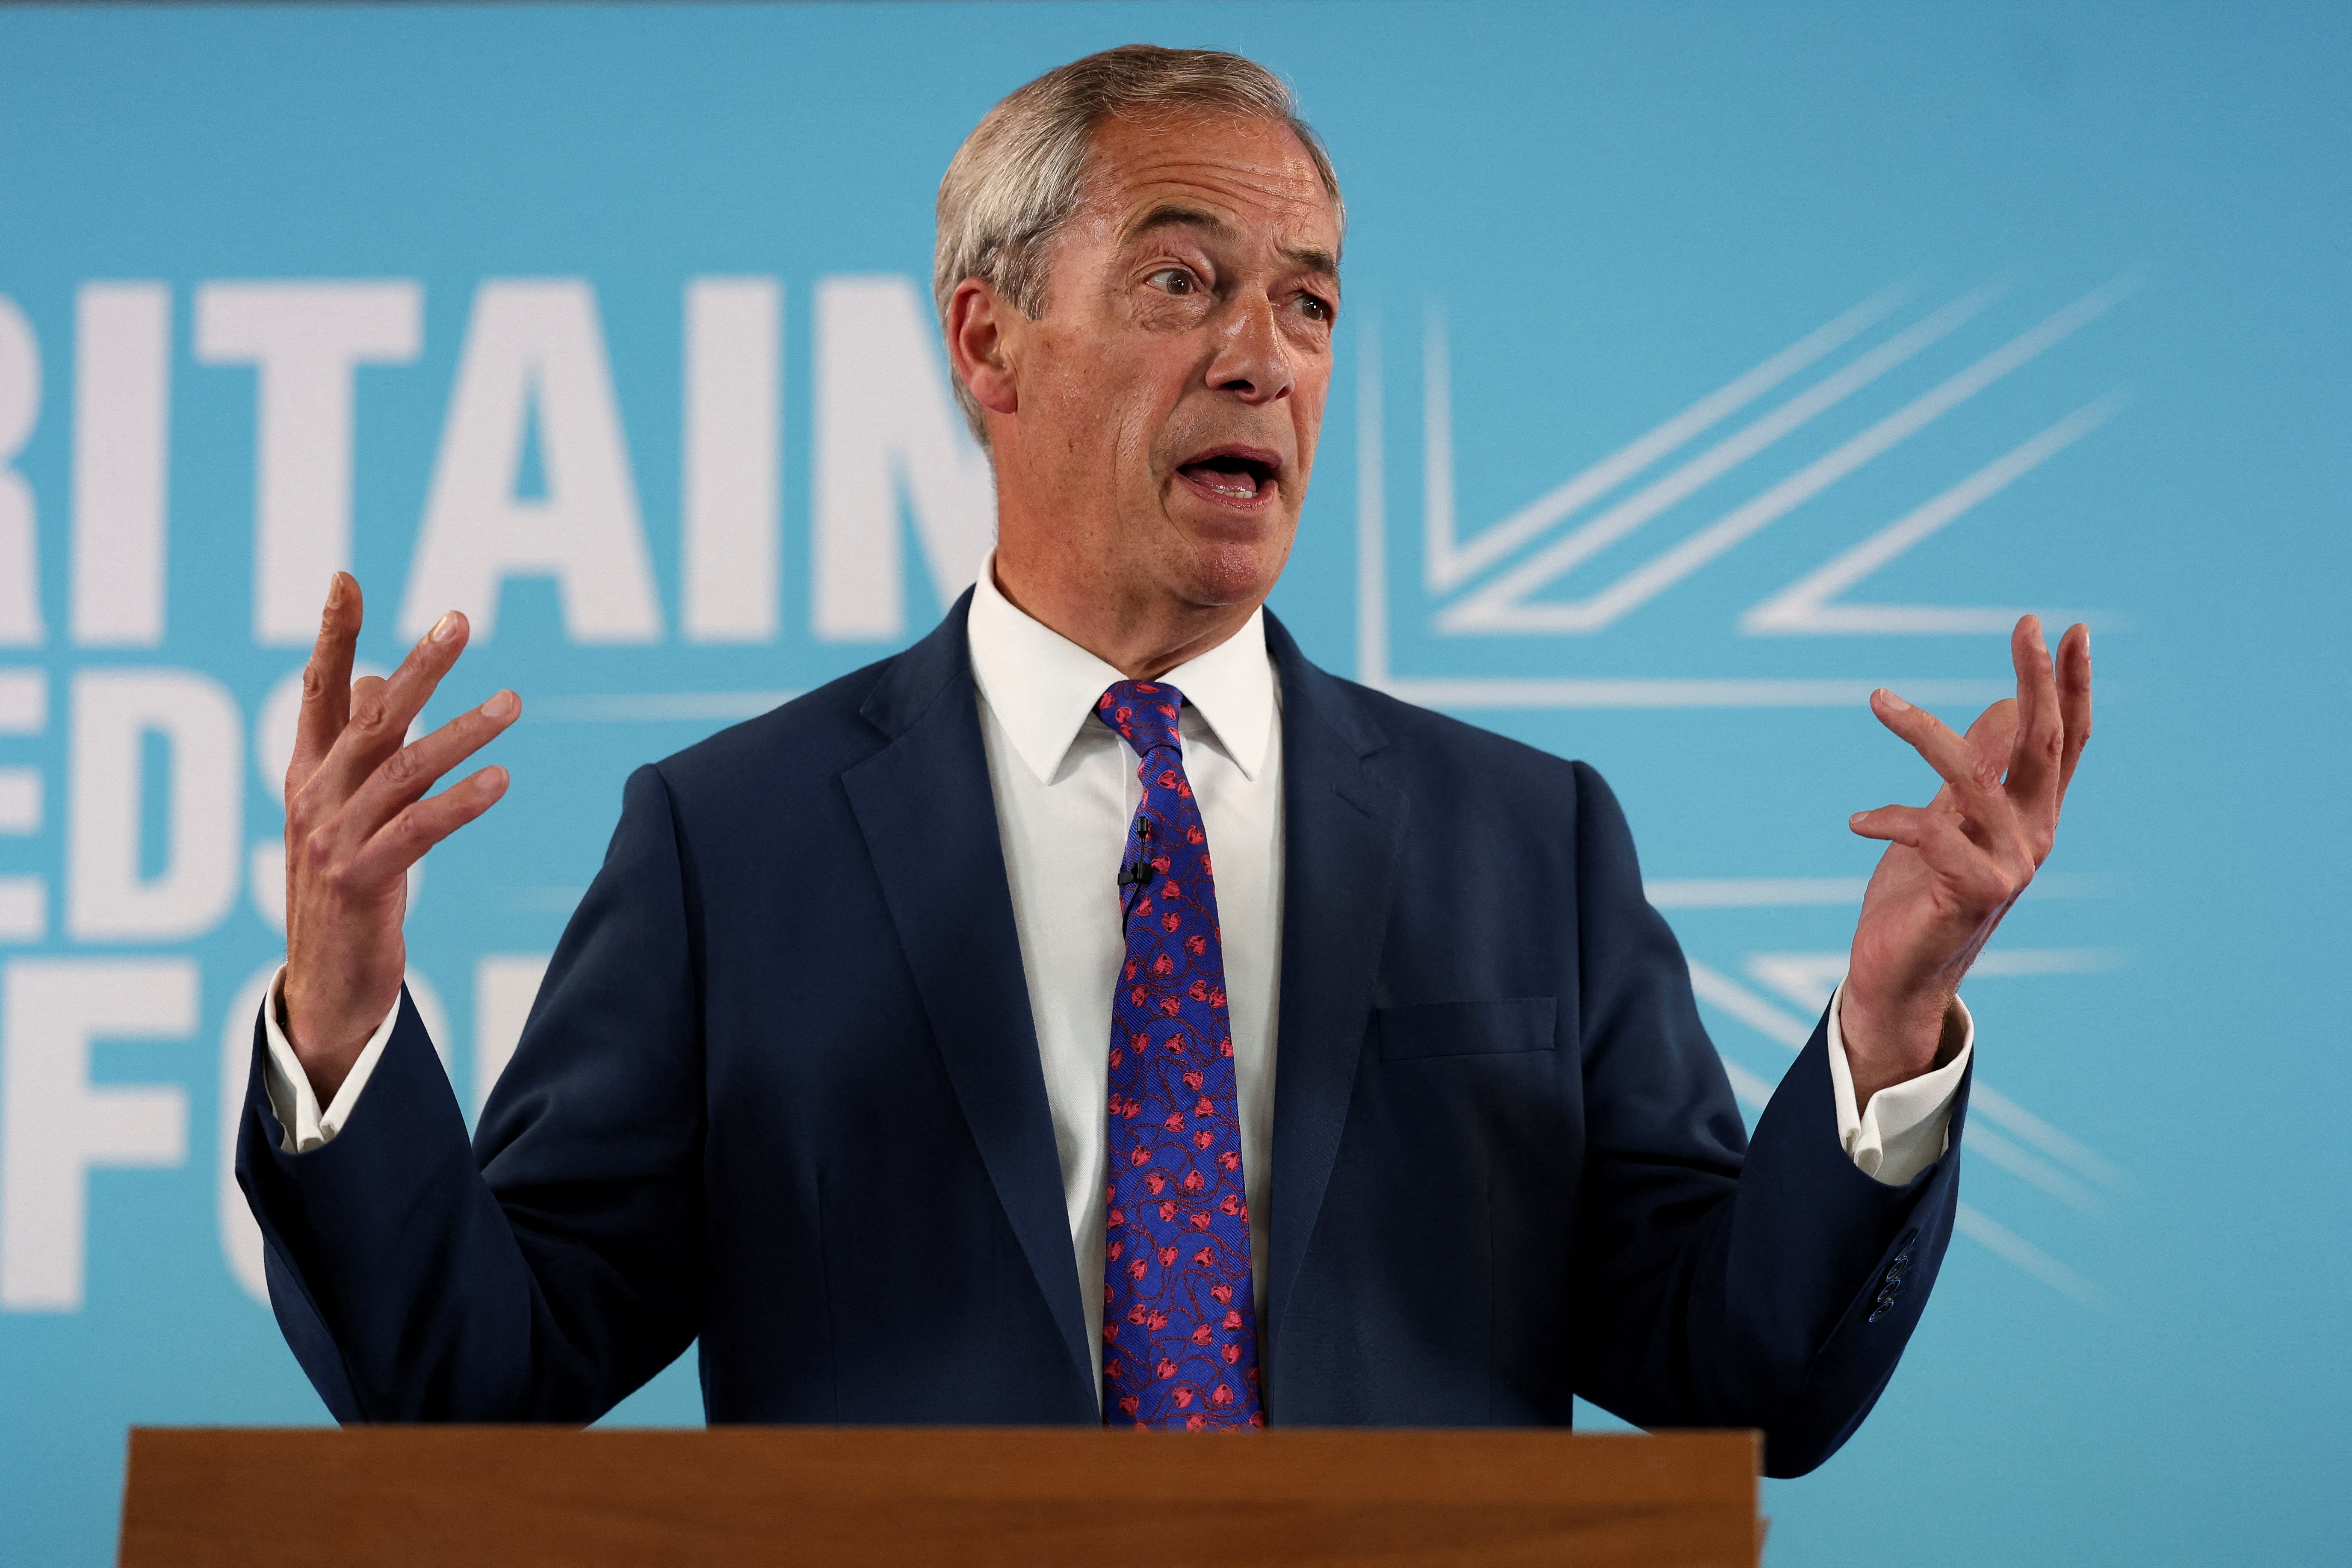 nigel farage, polls, general election, politics, rishi sunak, sir keir starmer, reform uk, labour, general election latest: farage’s reform manifesto called ‘unserious’ for spending three times more than truss